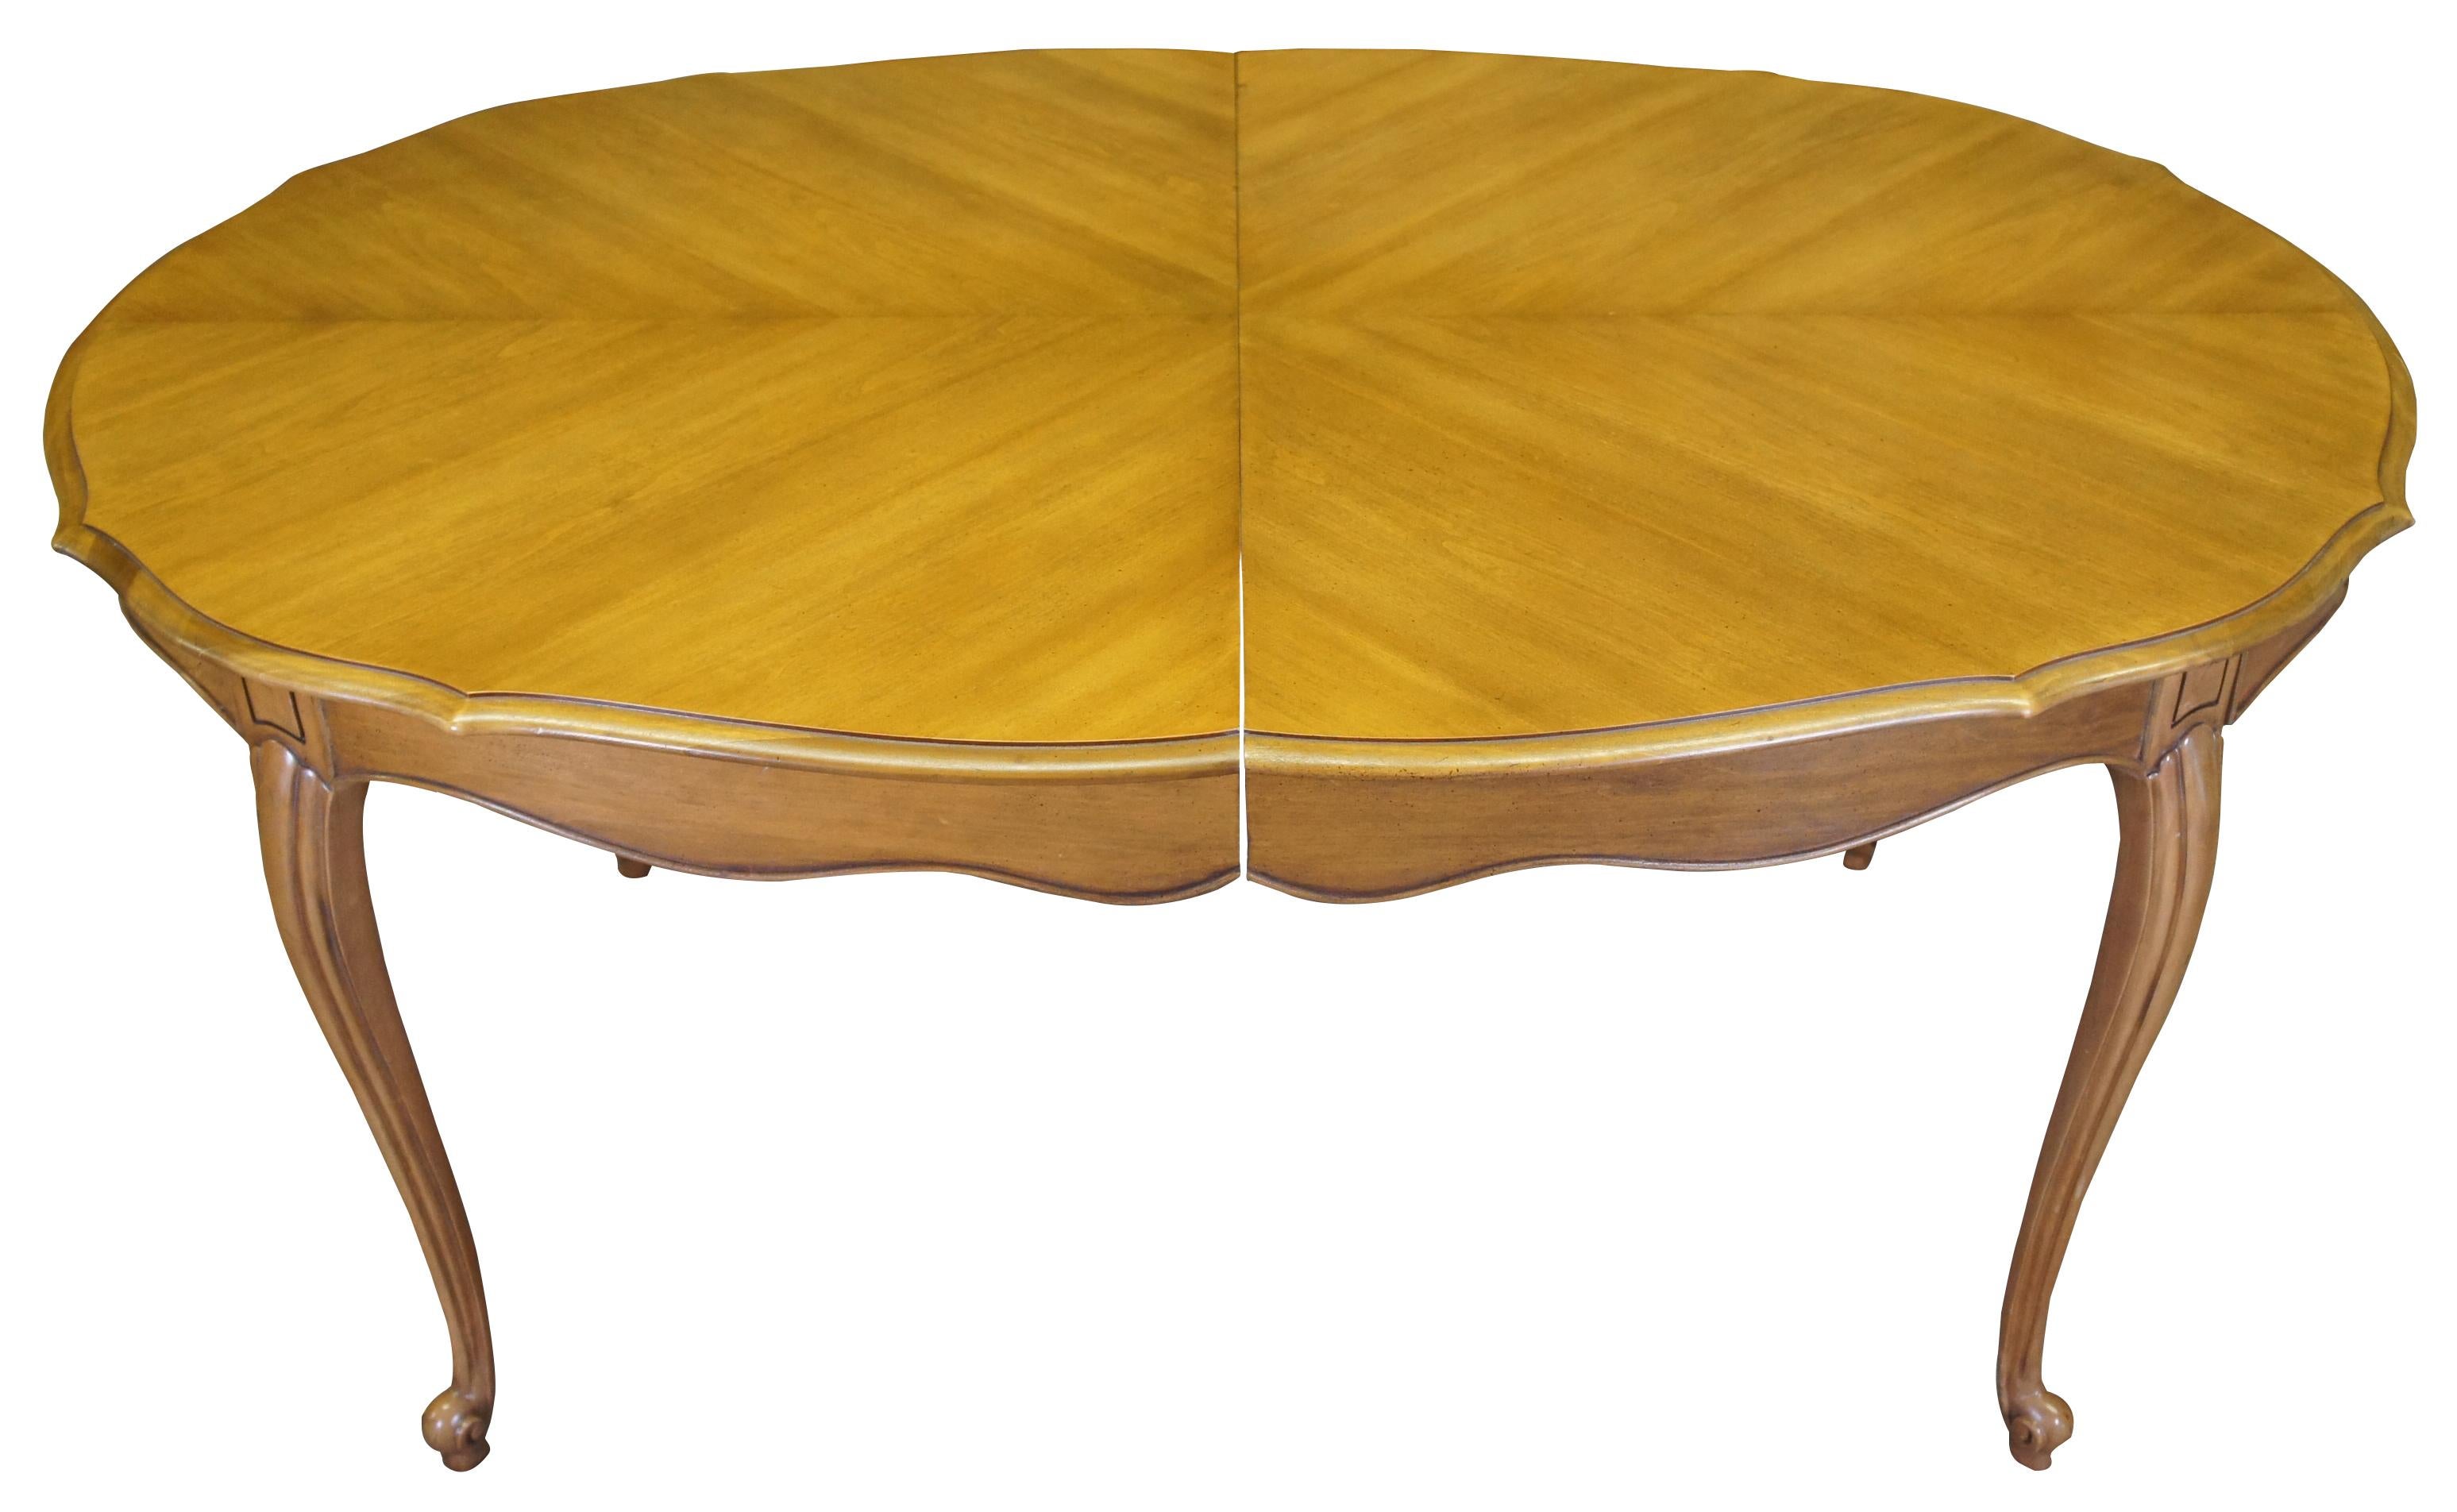 Mid 20th century French Provincial dining table. Made from walnut with an oval form featuring a scalloped top with matchbook veneer and long scrolled french legs. Extends to 101